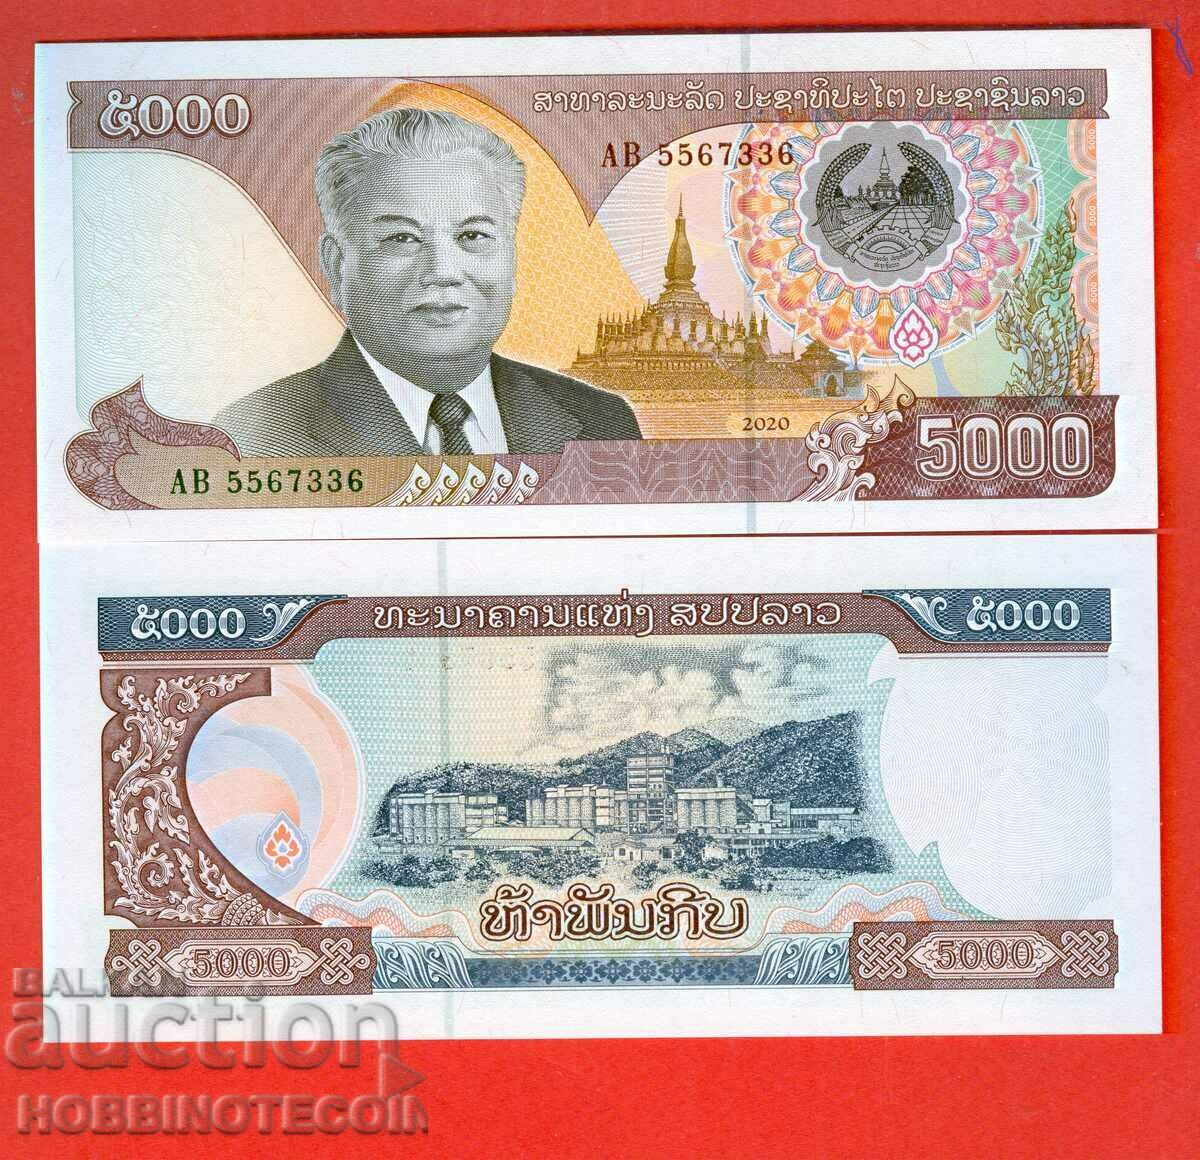 LAOS LAO 5000 5000 Kip issue issue 2020 NEW UNC